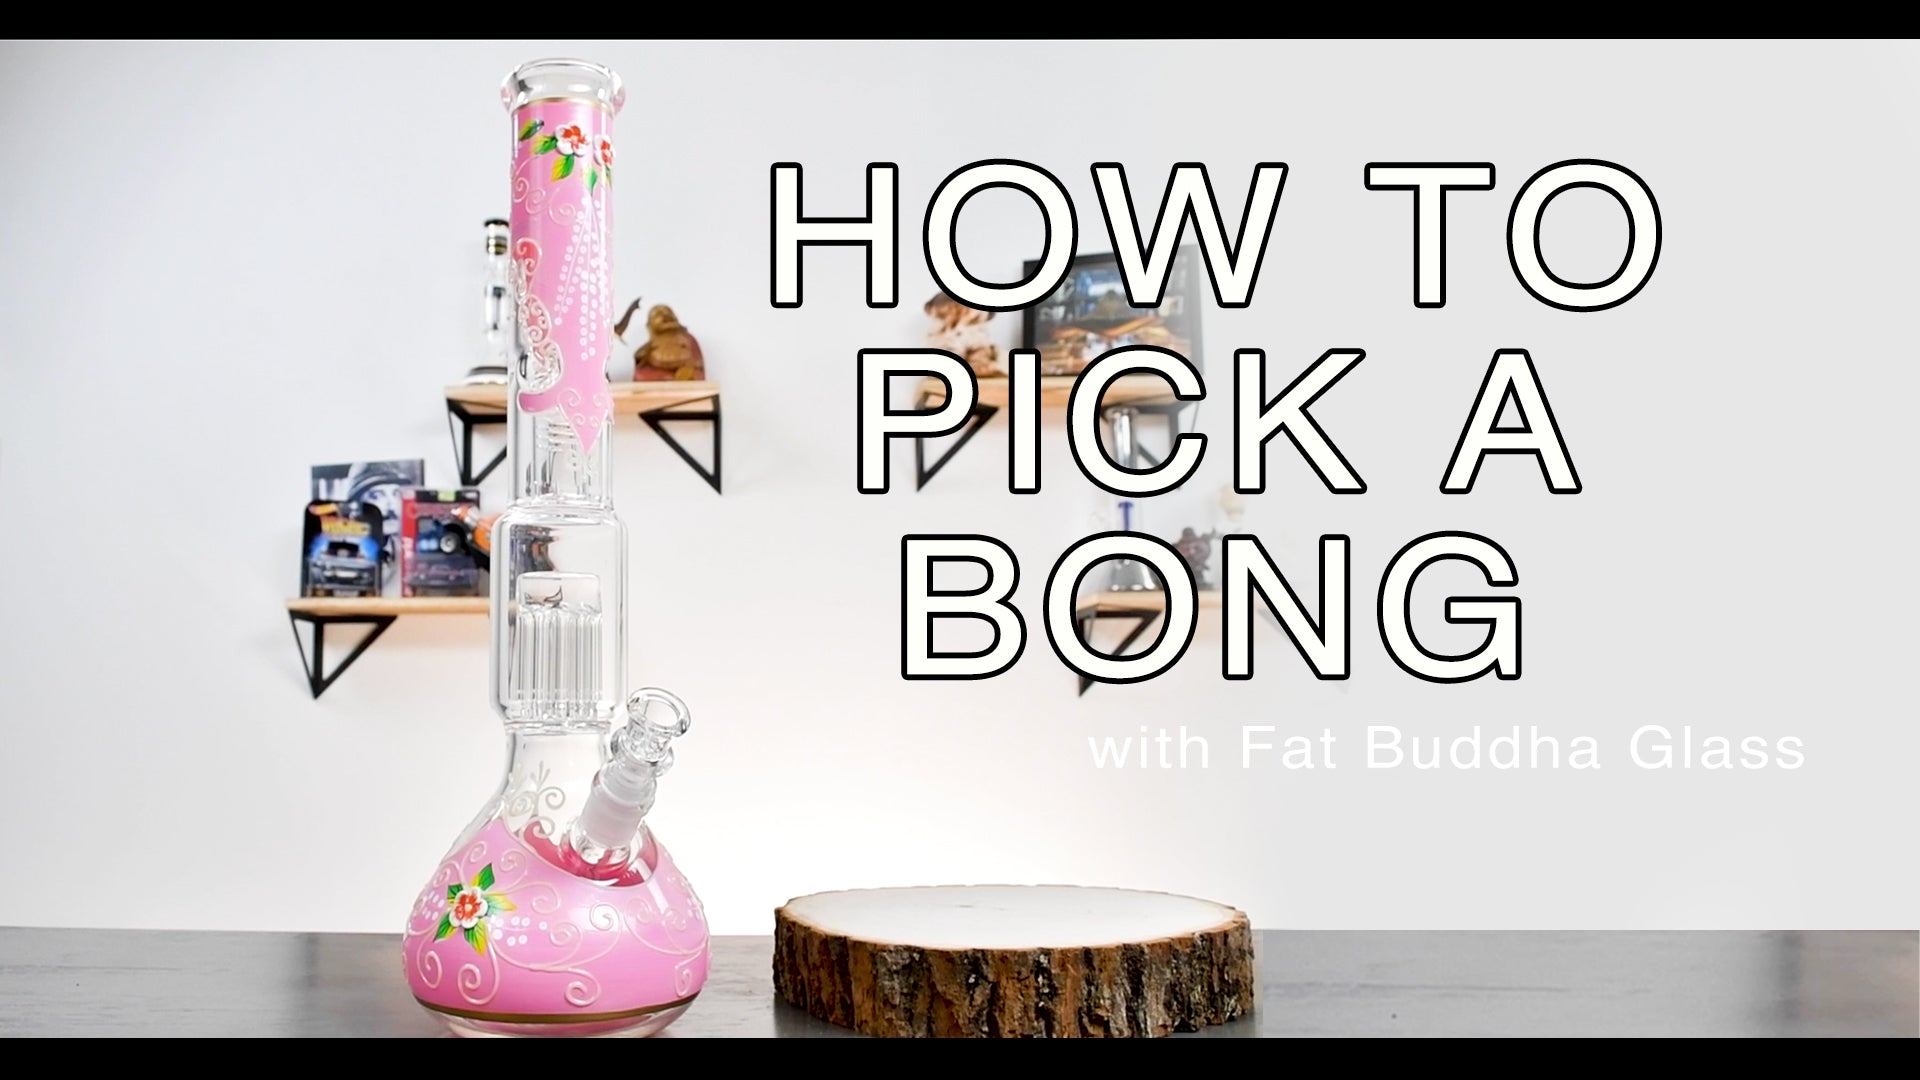 How to buy a bong